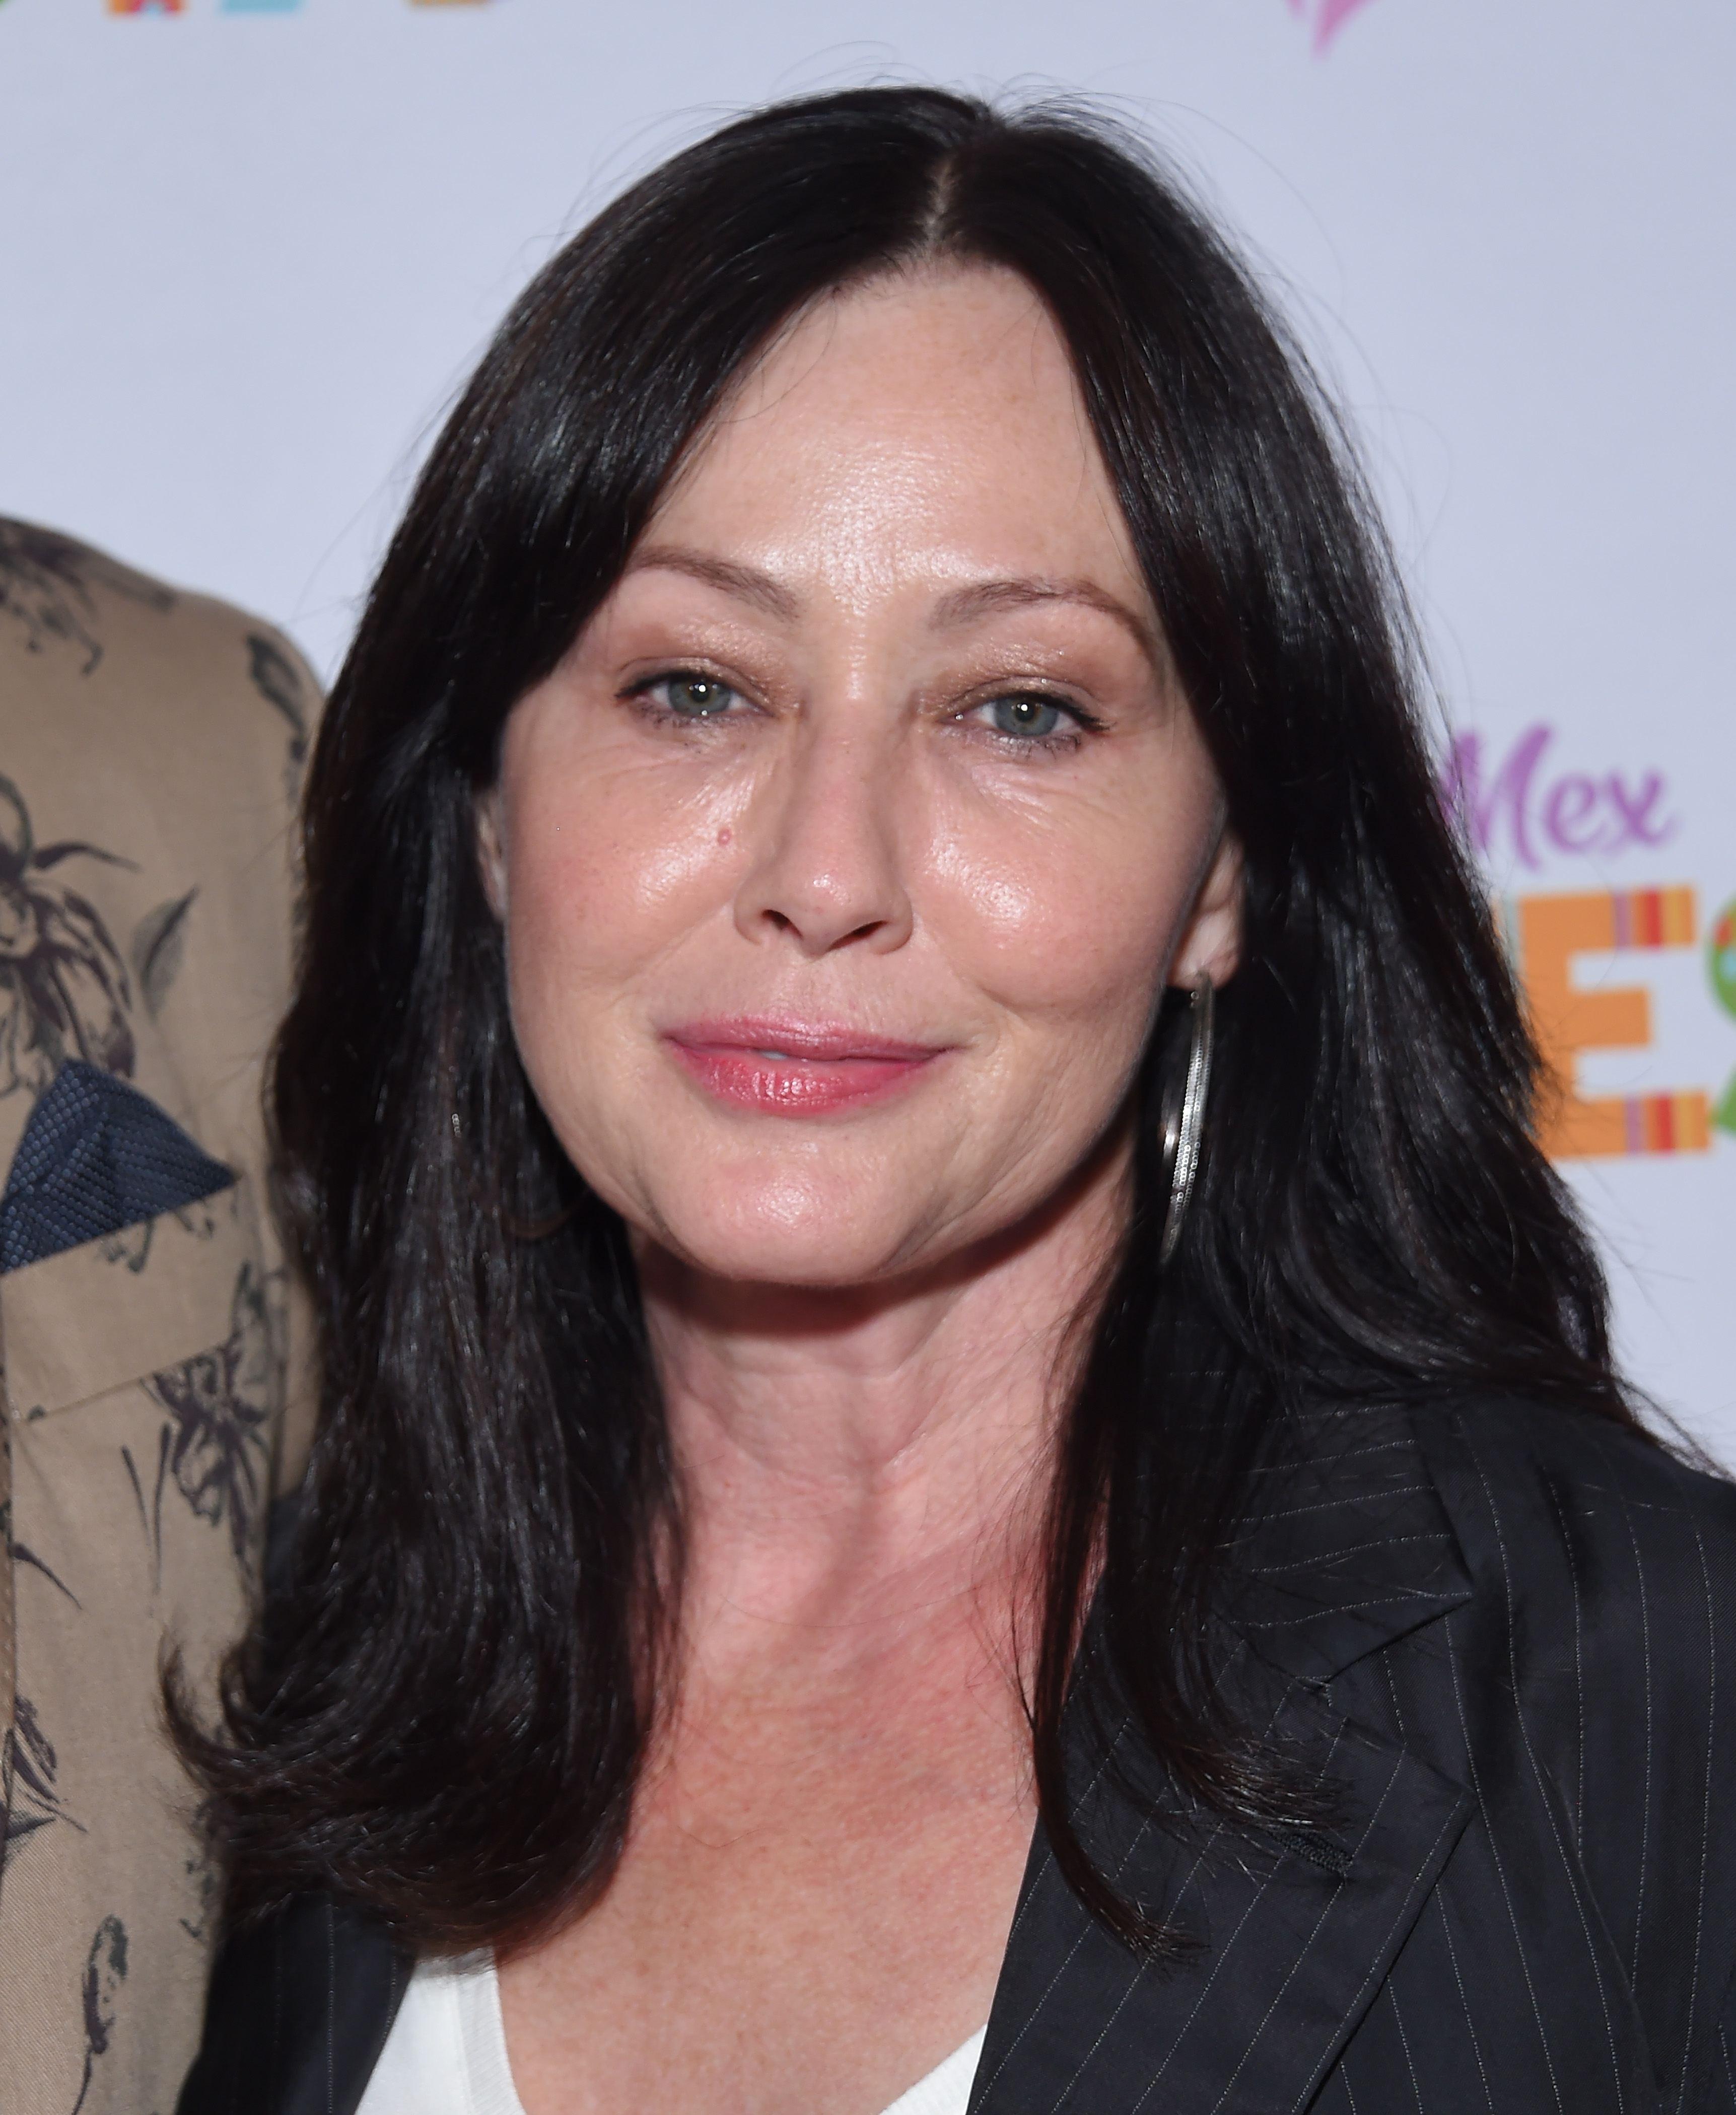 Shannen Doherty on September 6, 2019 in Beverly Hills, California. | Source: Getty Images